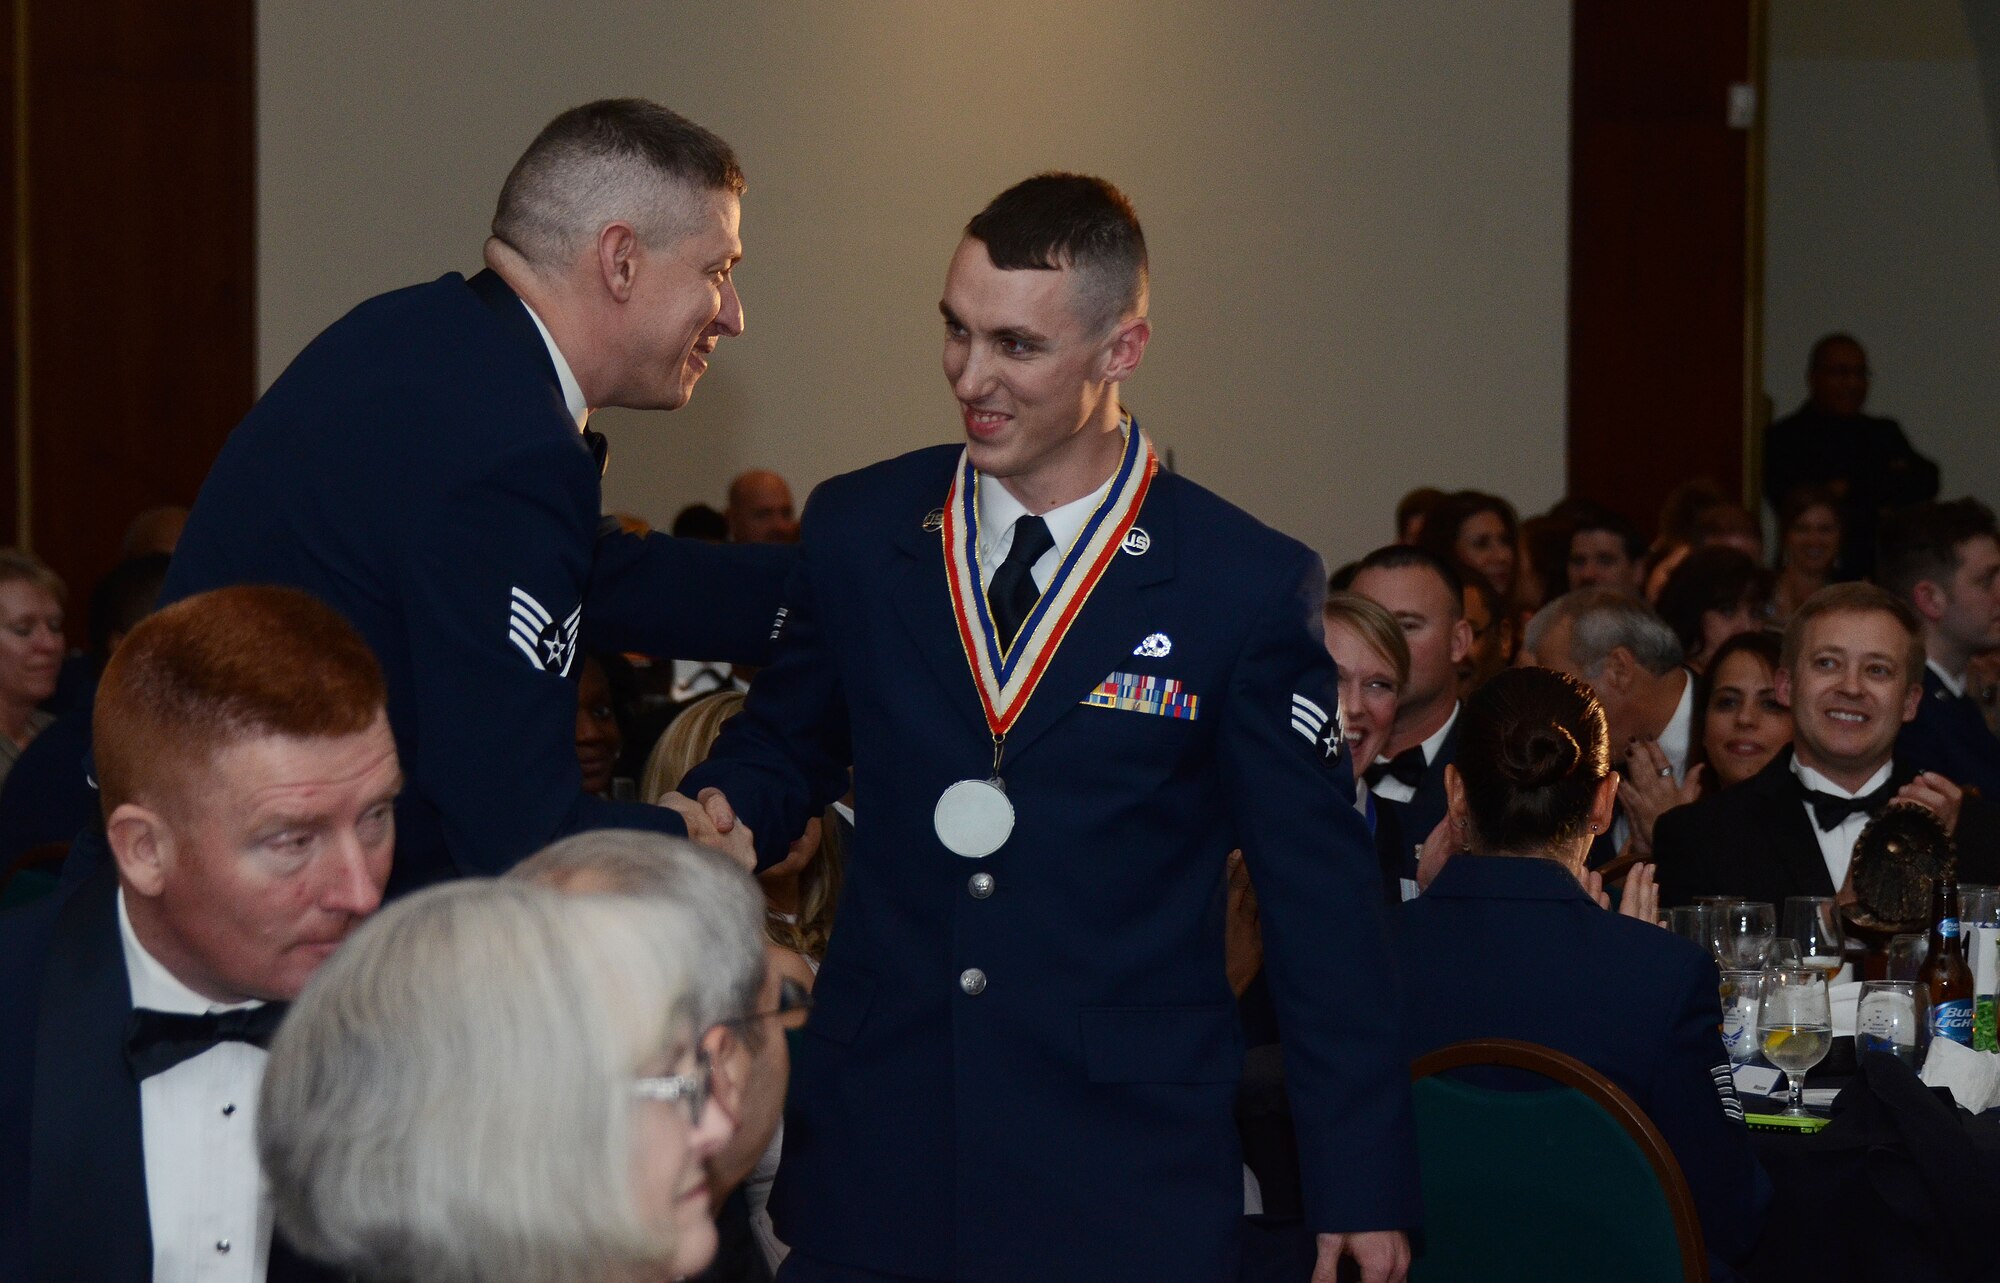 Airman of the Year, SrA David Yancey, 94th Aircraft Maintenance Squadron, receives a congratulatory handshake before walking up to receive his award. (Photo by U.S. Air Force/ Don Peek)